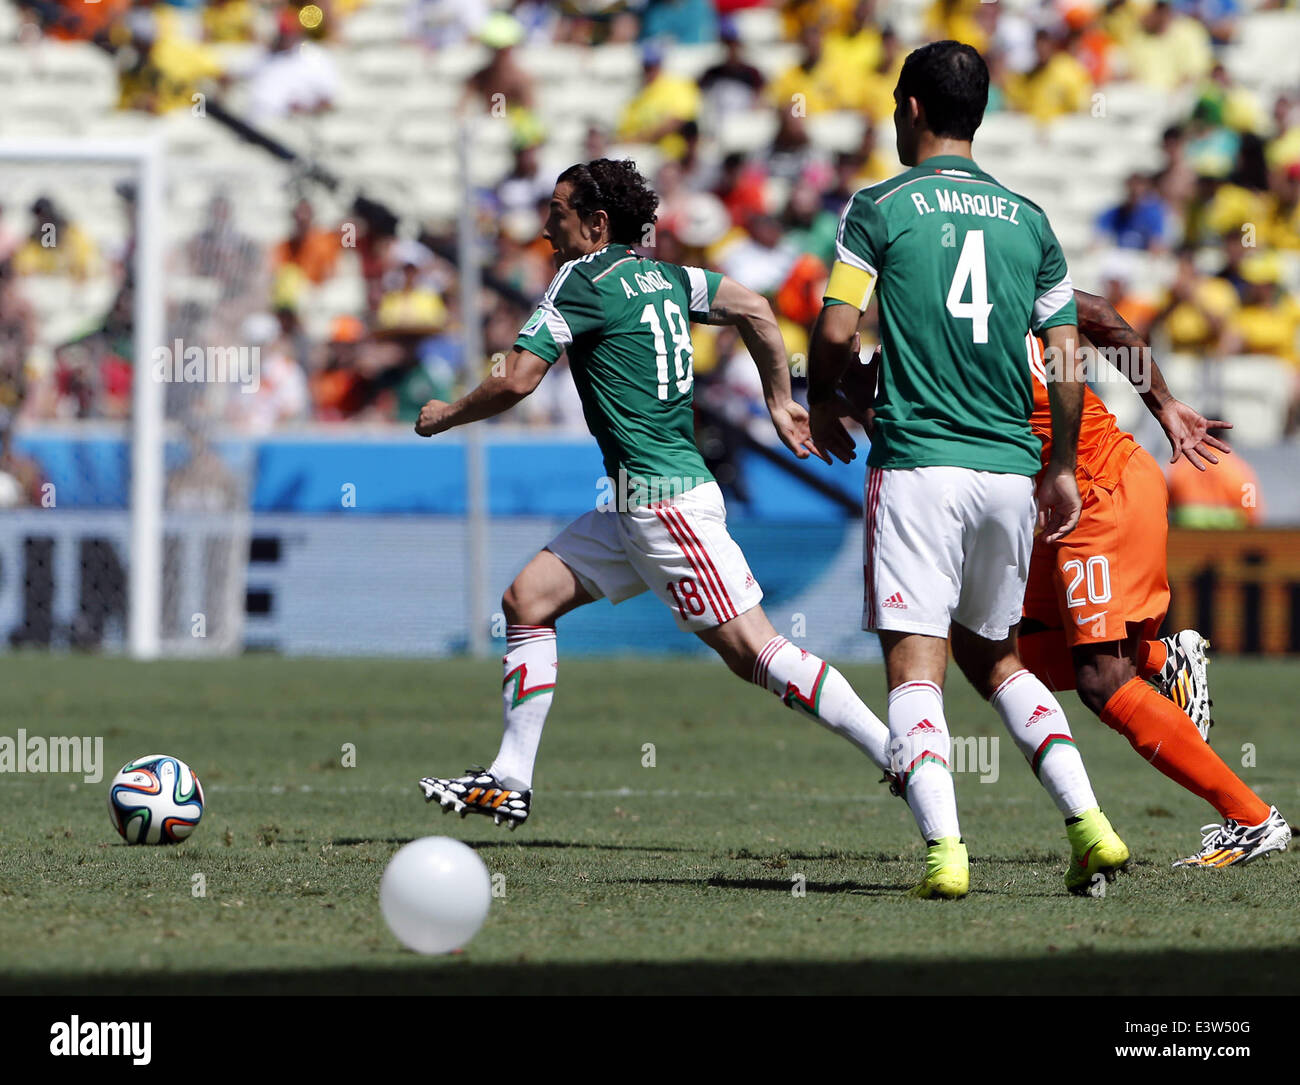 Fortaleza, Brazil. 29th June, 2014. Mexico's Andres Guardado (1st L) controls the ball during a Round of 16 match between Netherlands and Mexico of 2014 FIFA World Cup at the Estadio Castelao Stadium in Fortaleza, Brazil, on June 29, 2014. Credit:  Zhou Lei/Xinhua/Alamy Live News Stock Photo